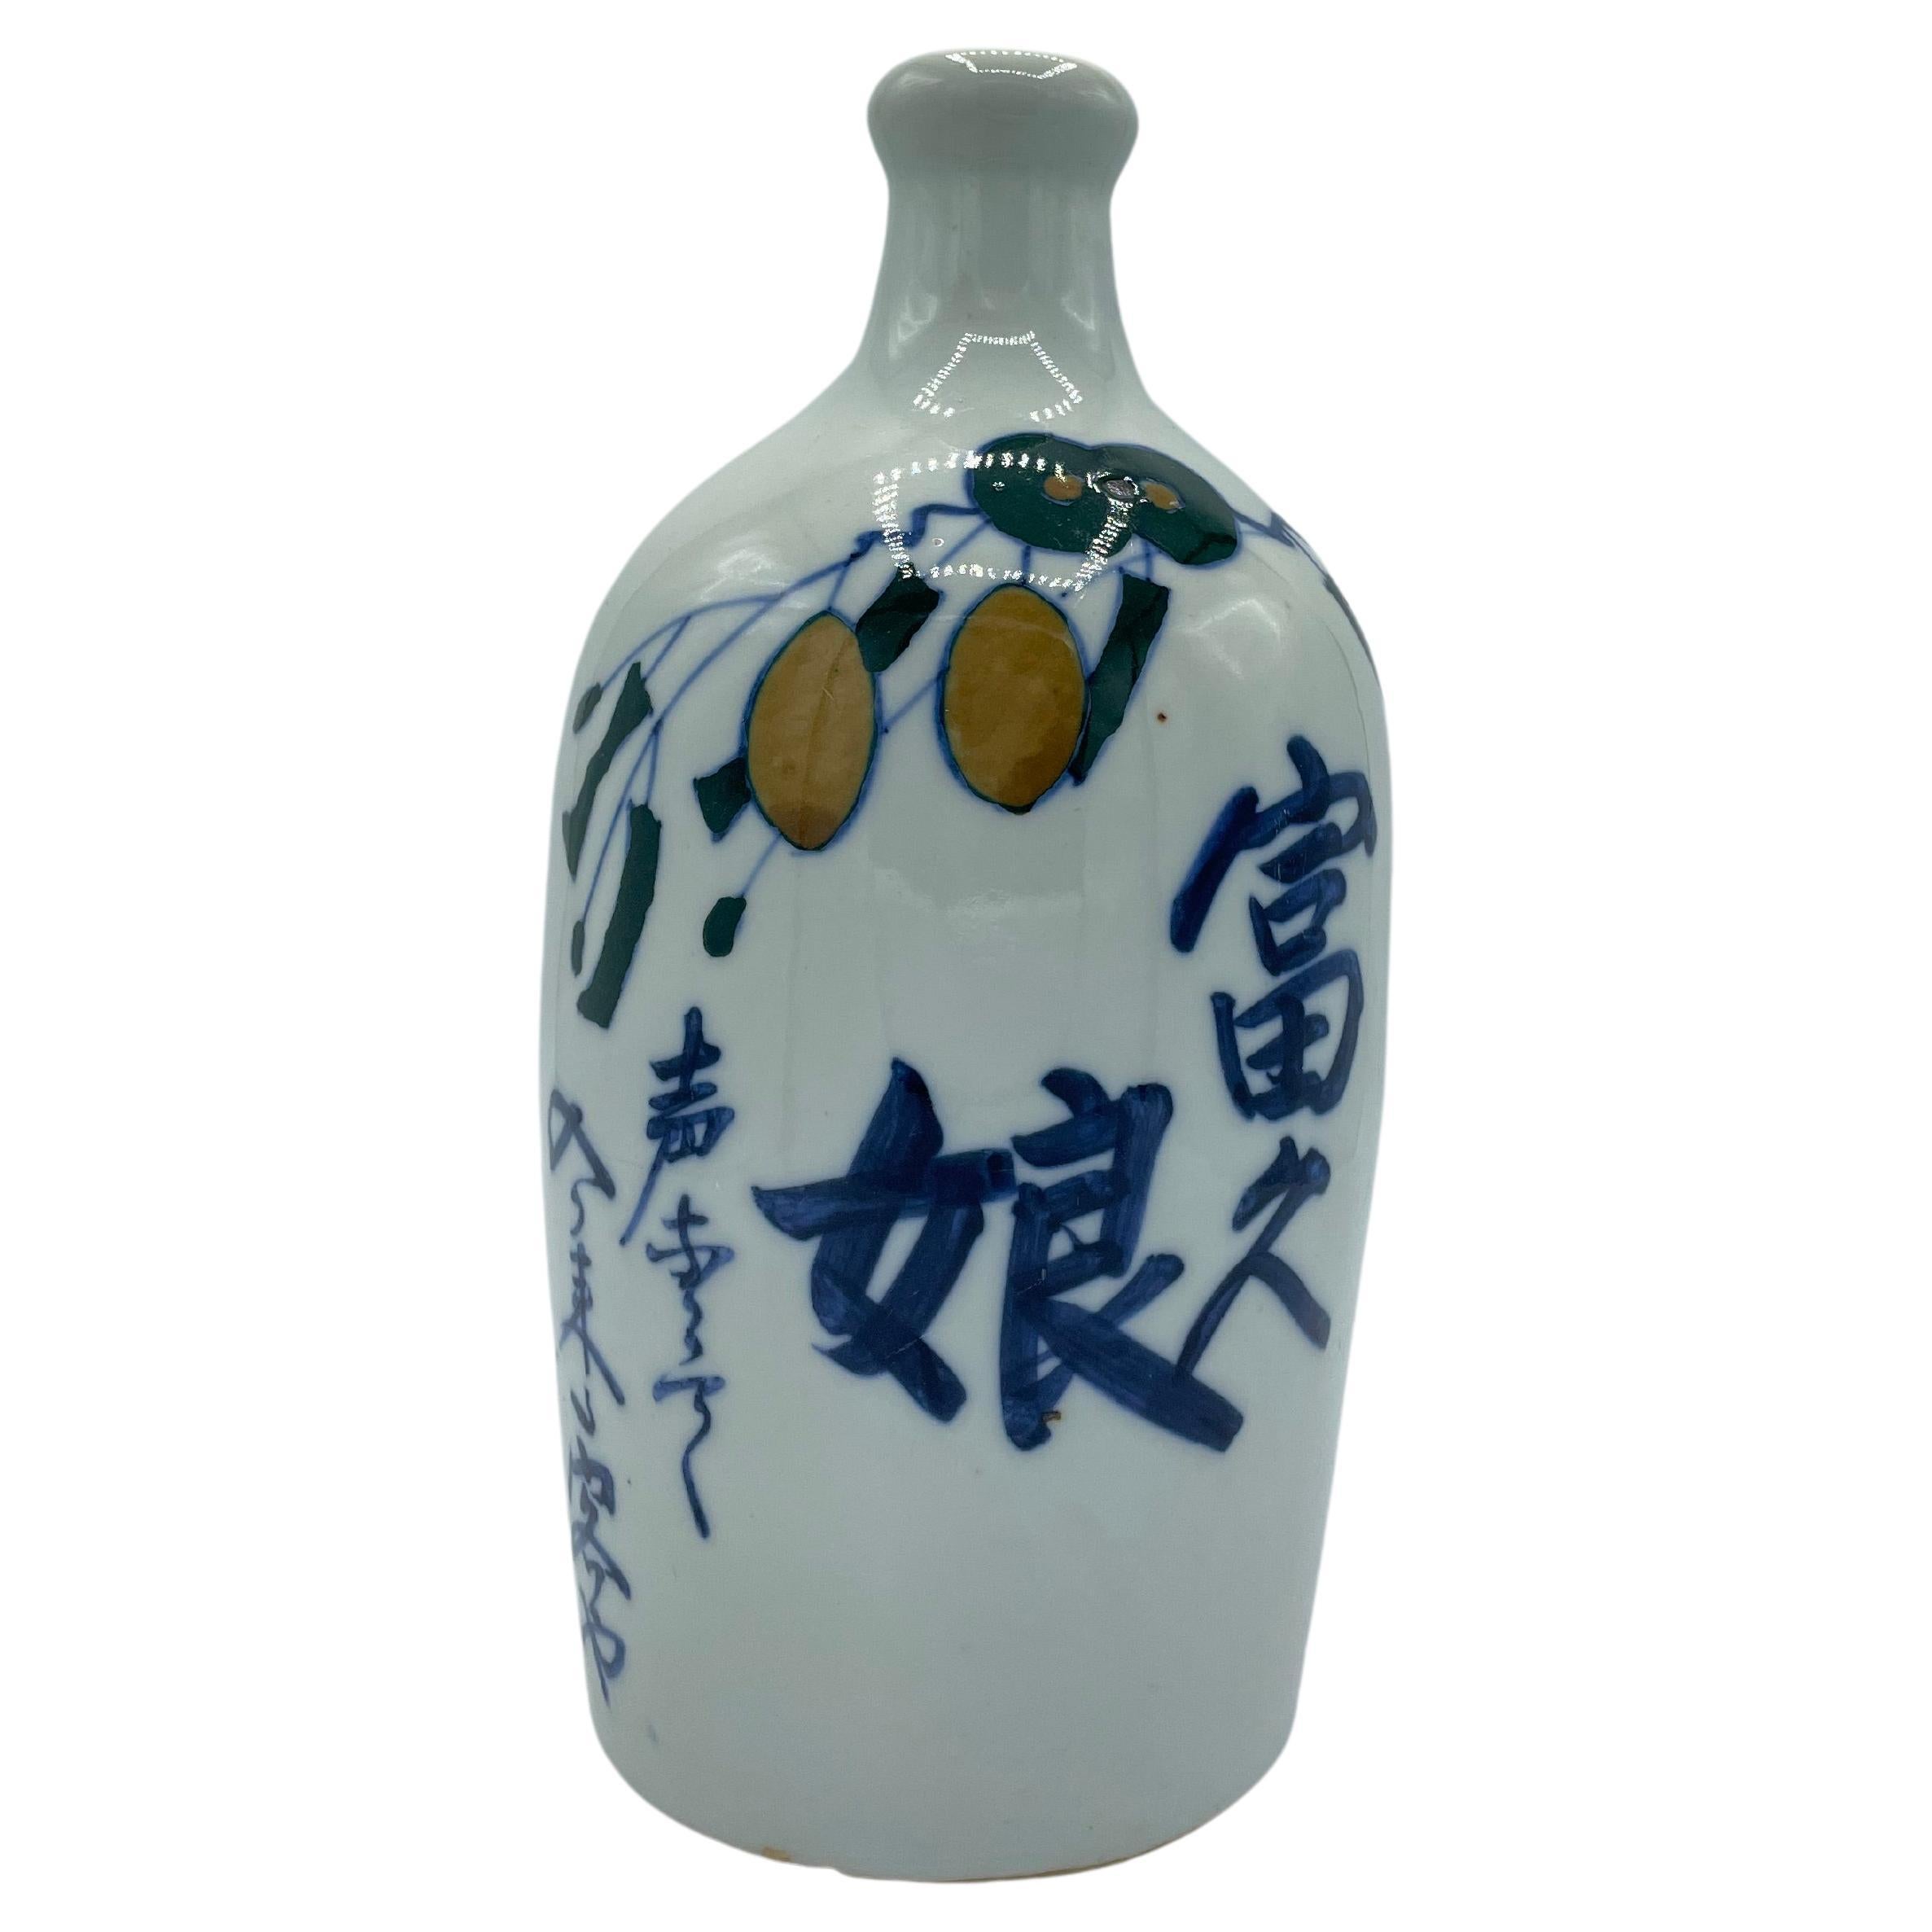 What is a Japanese sake bottle called?